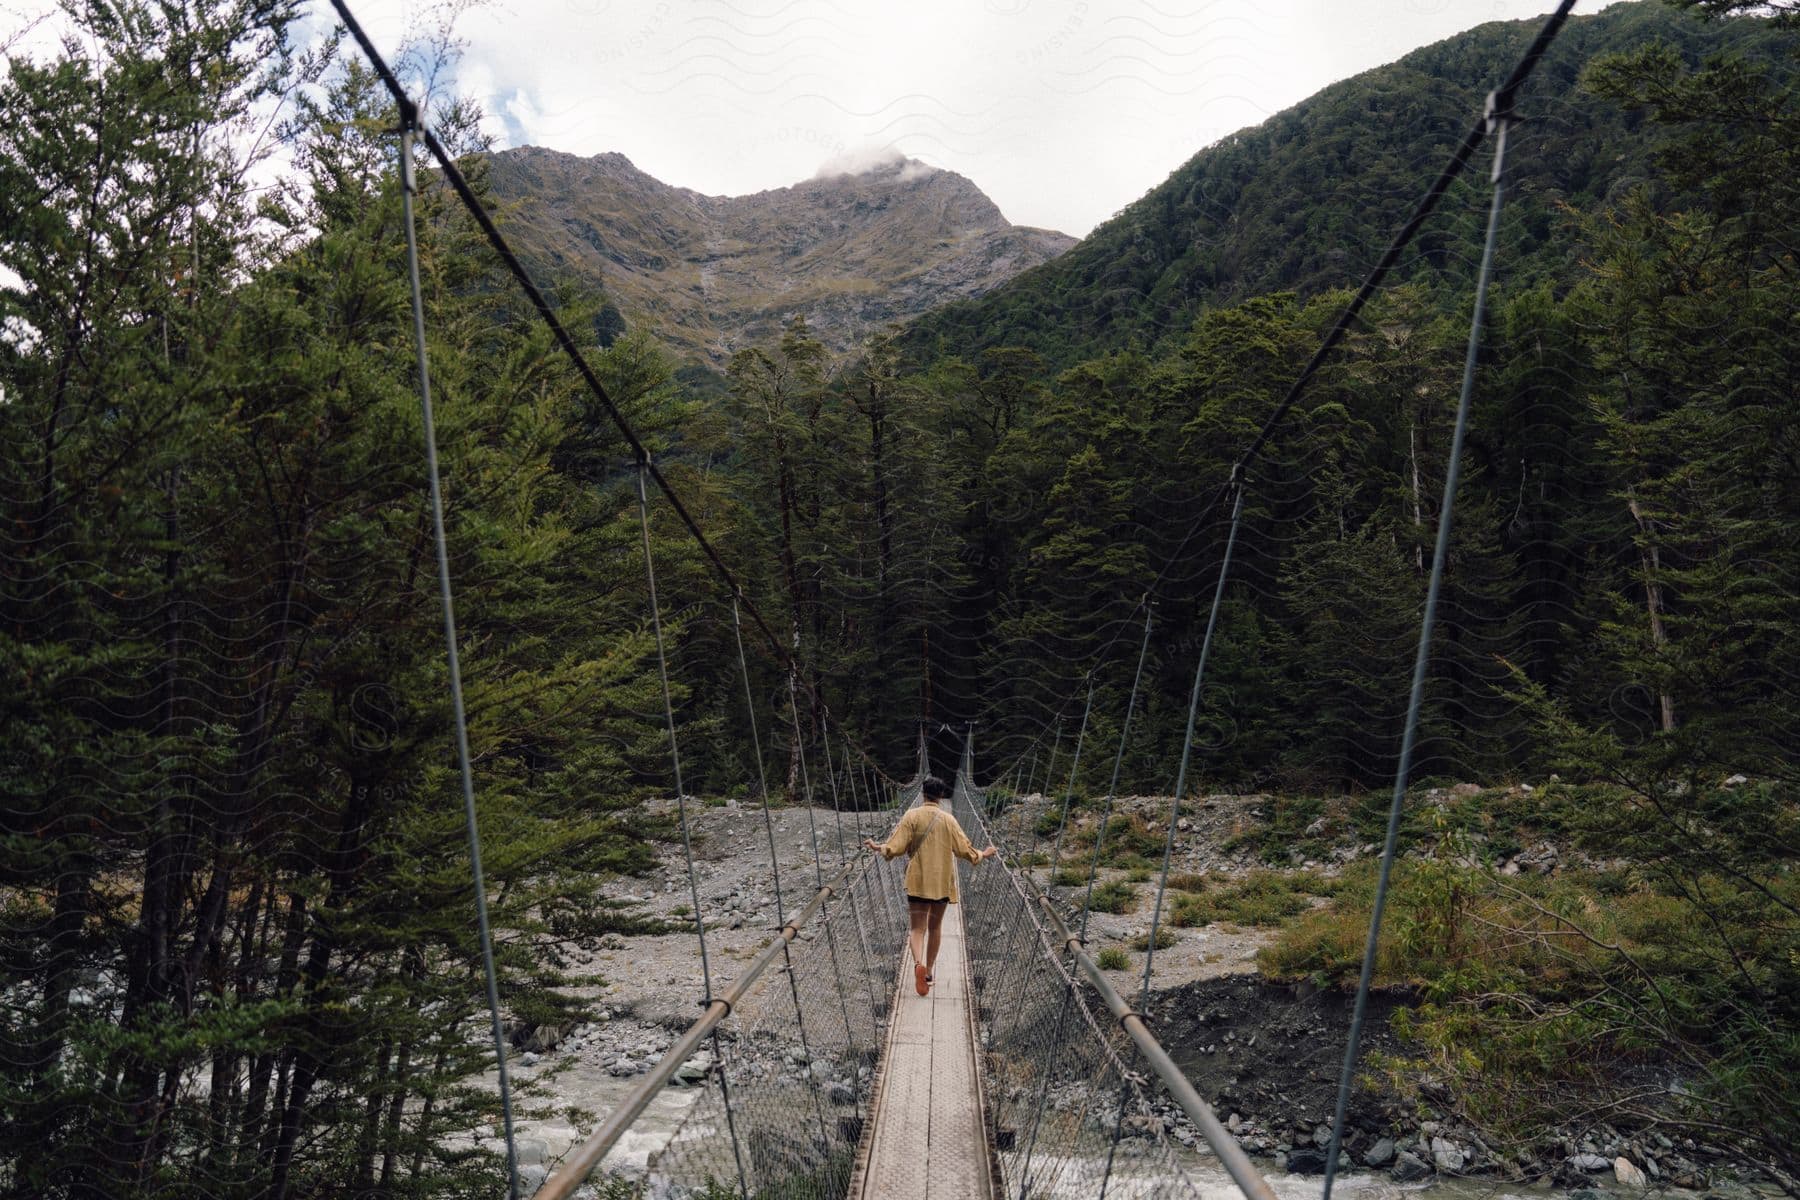 A person in a yellow shirt is walking on a wooden suspension bridge in a region with many trees